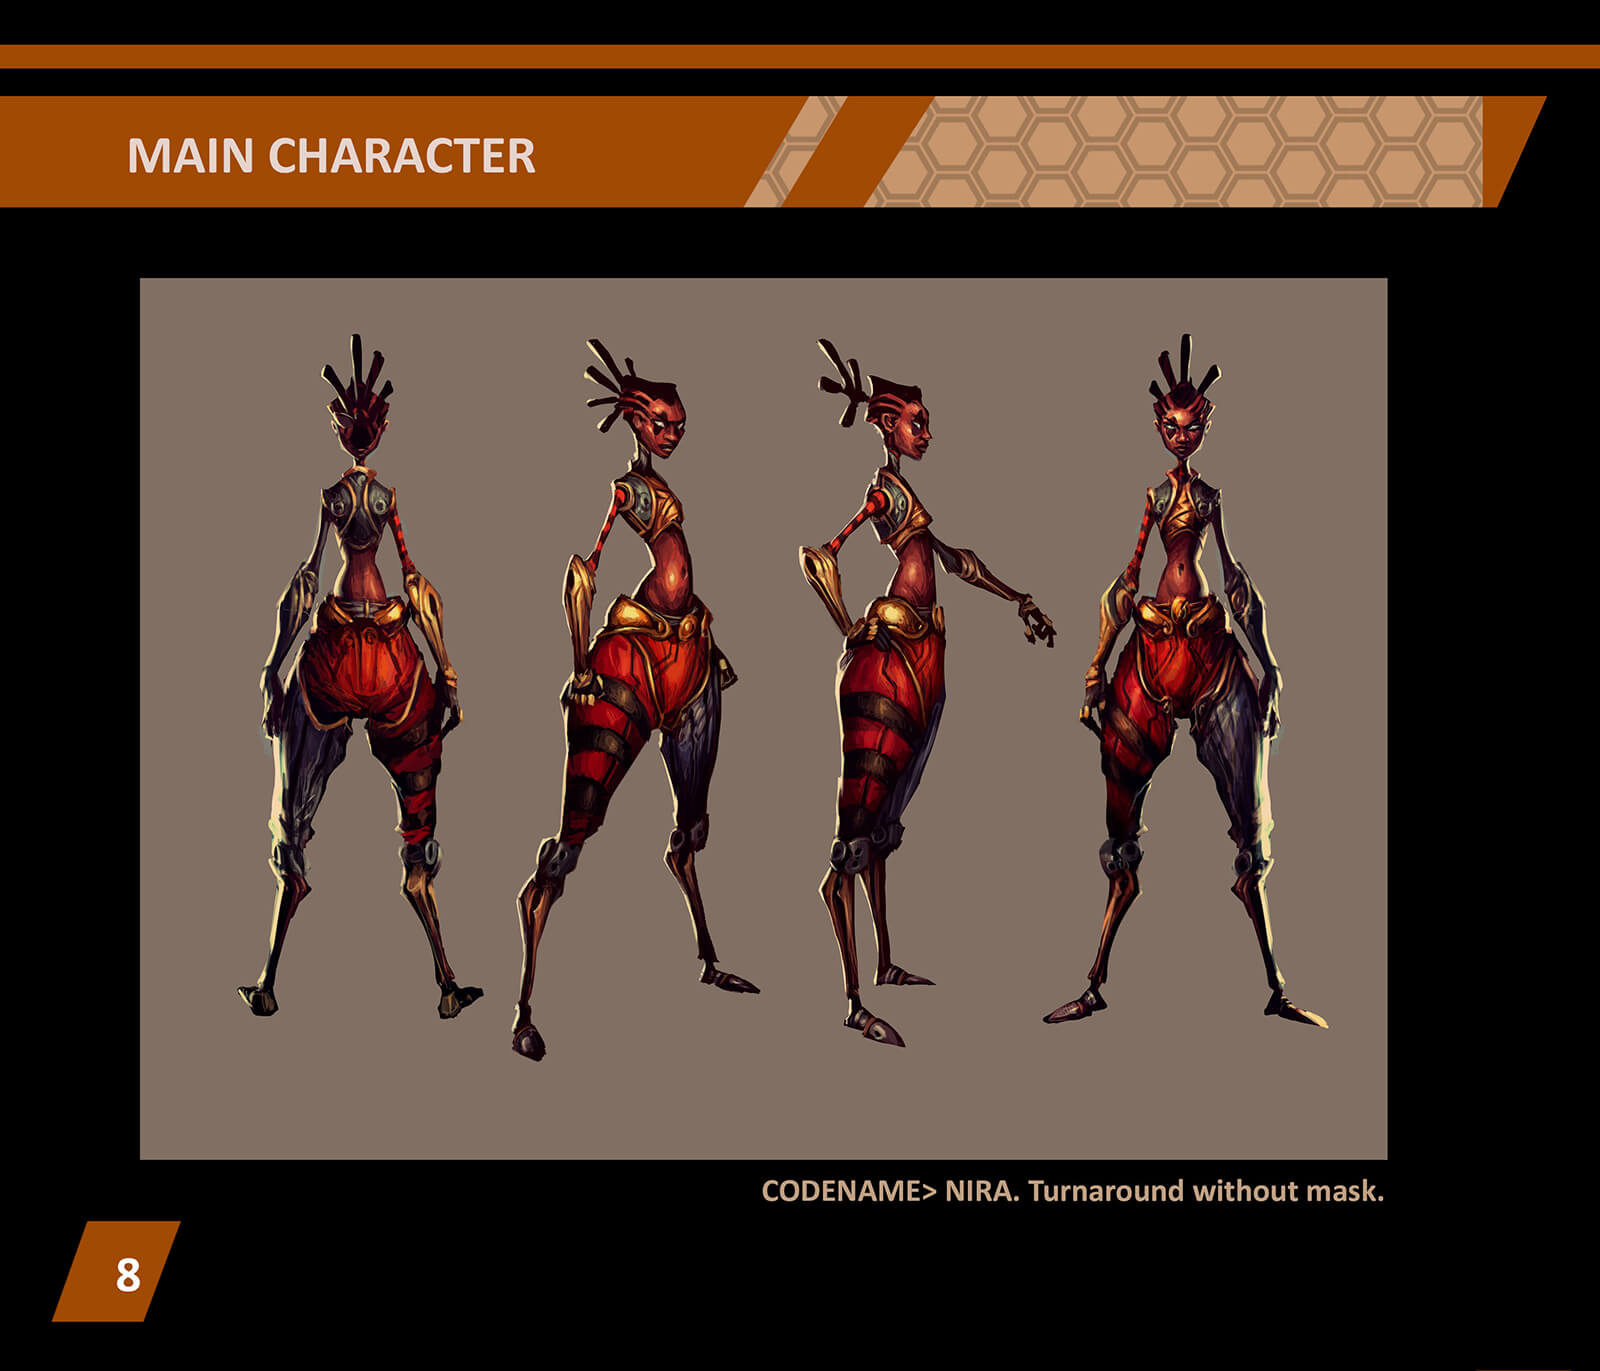 Character design turnaround of an abstractly proportioned woman standing in ornate red and black battle gear